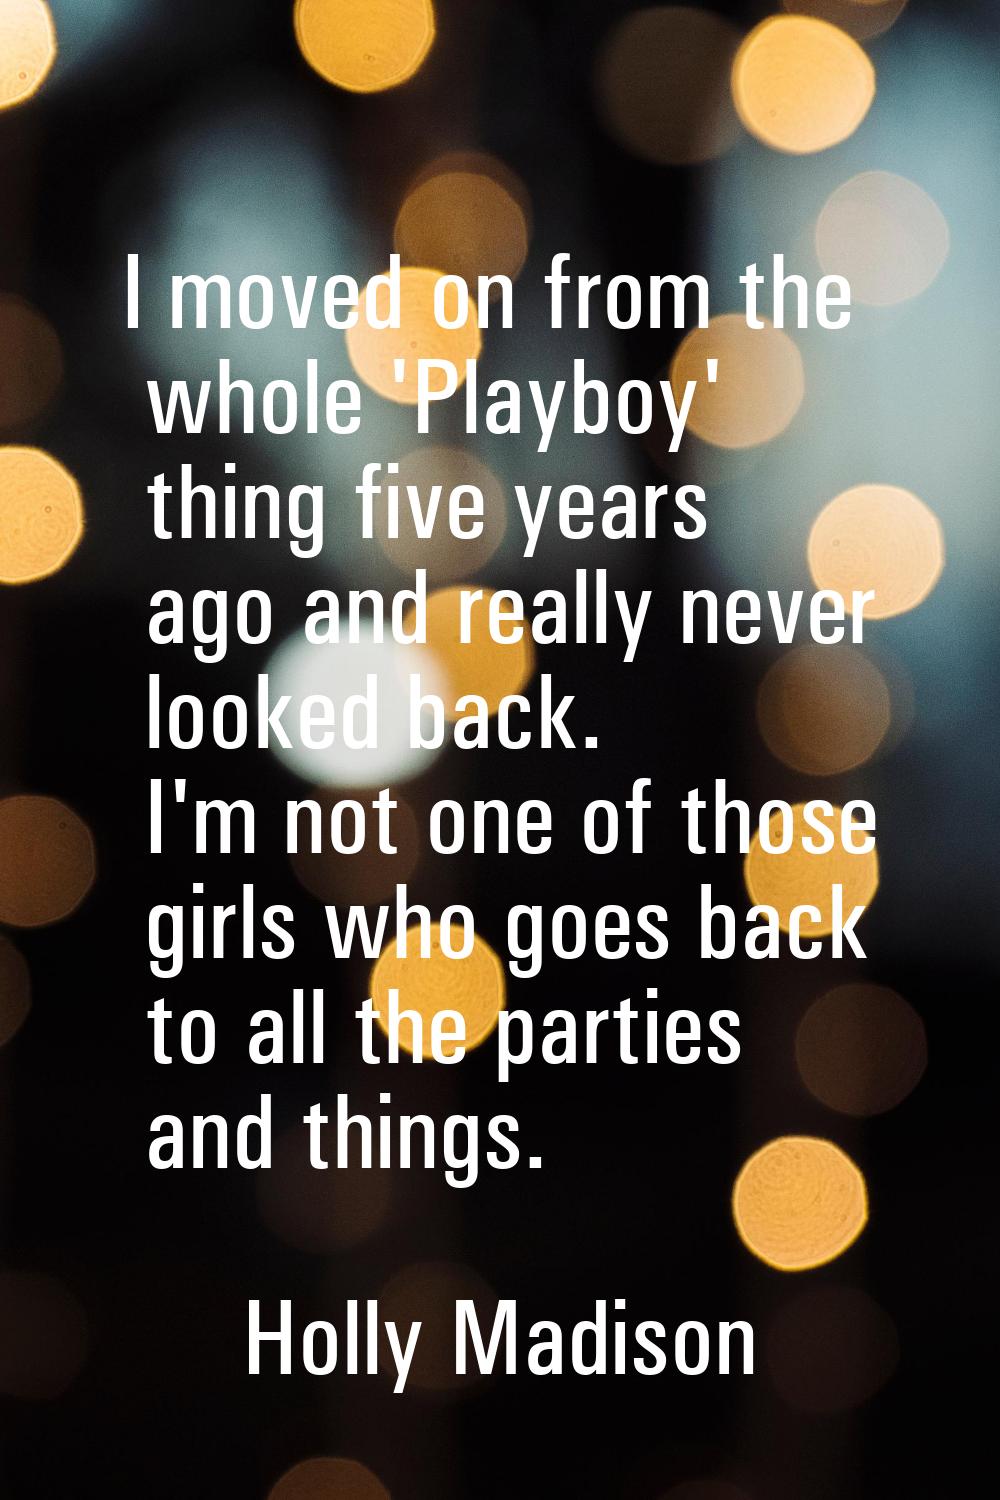 I moved on from the whole 'Playboy' thing five years ago and really never looked back. I'm not one 